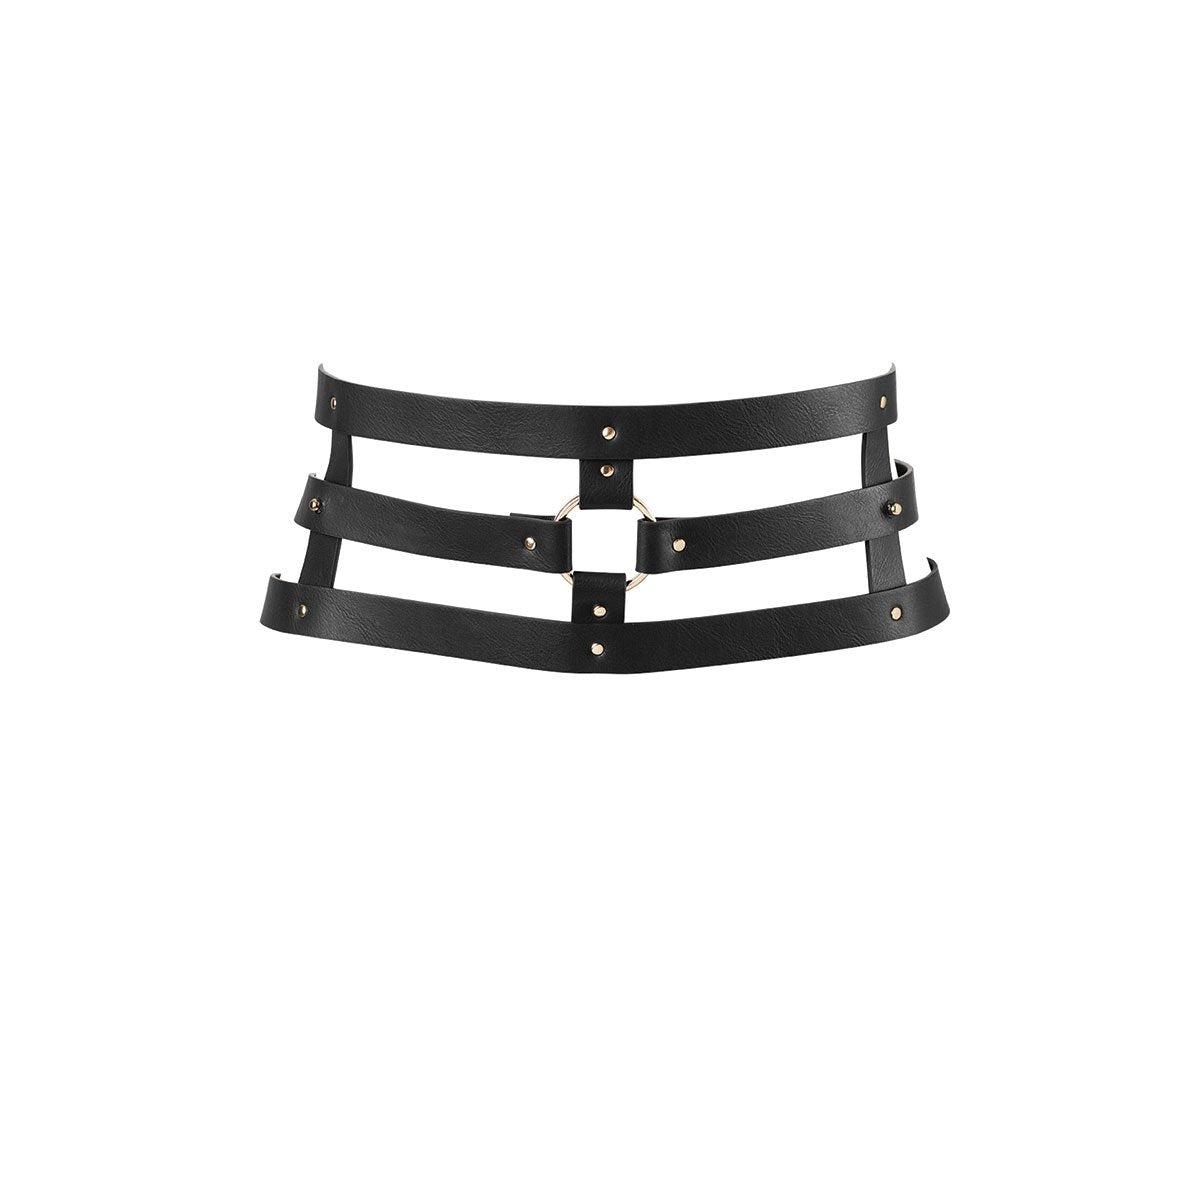 Bijoux Indiscrets Maze Wide Belt Restraints - Buy At Luxury Toy X - Free 3-Day Shipping